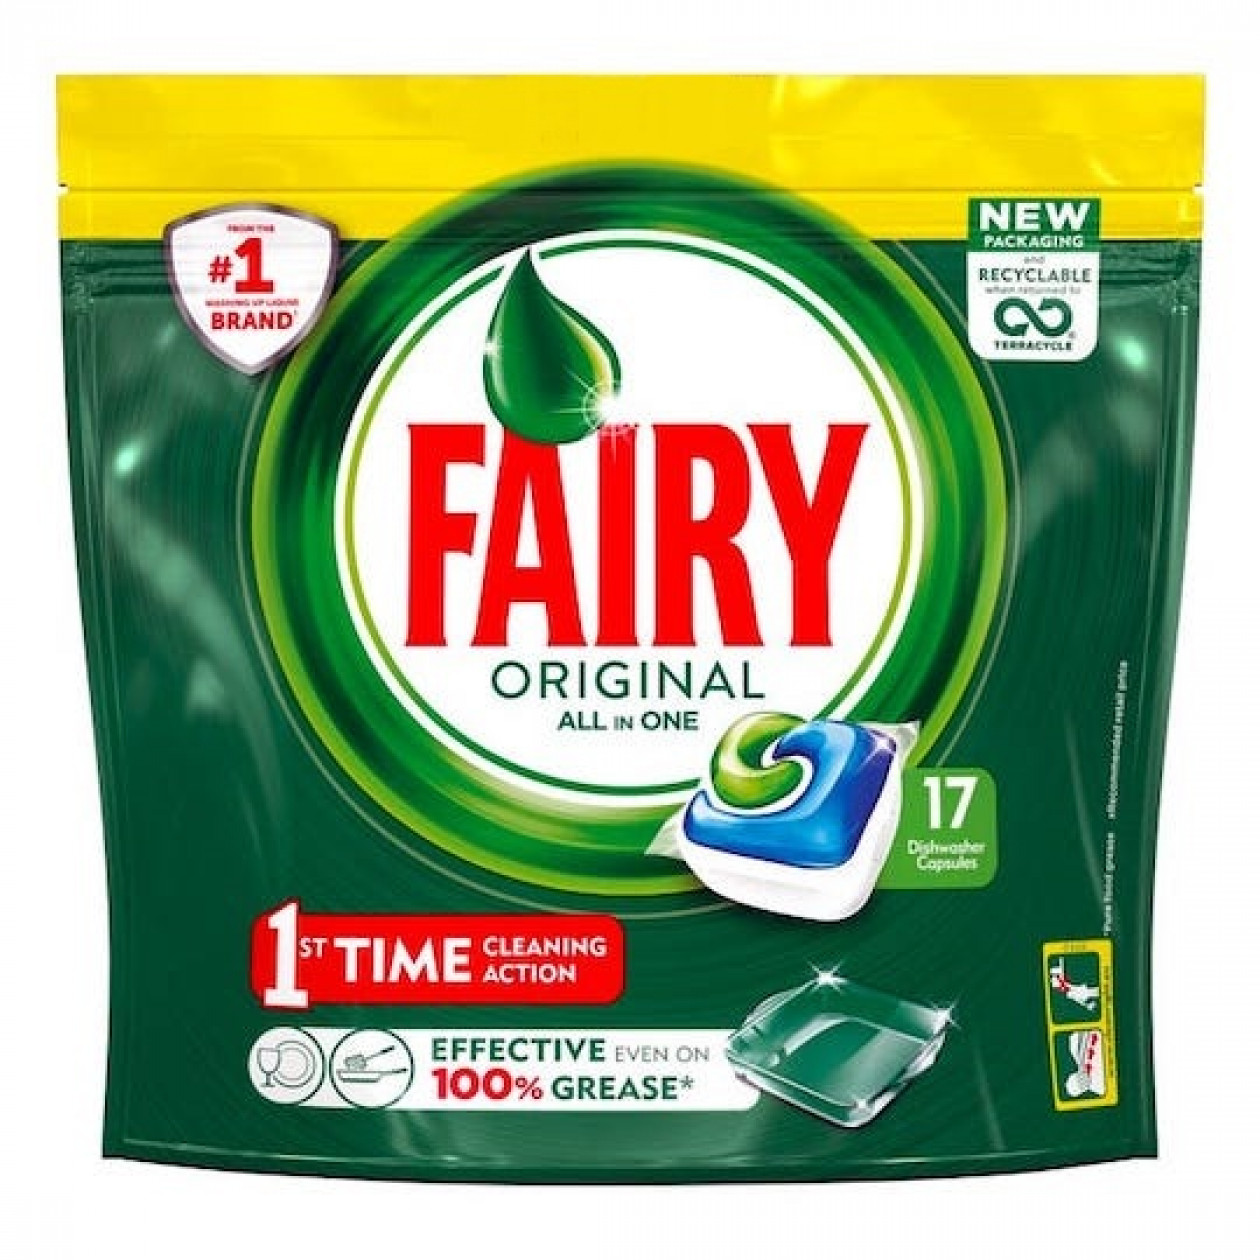 Fairy Original All In One Dishwasher Tablets 17 Pack